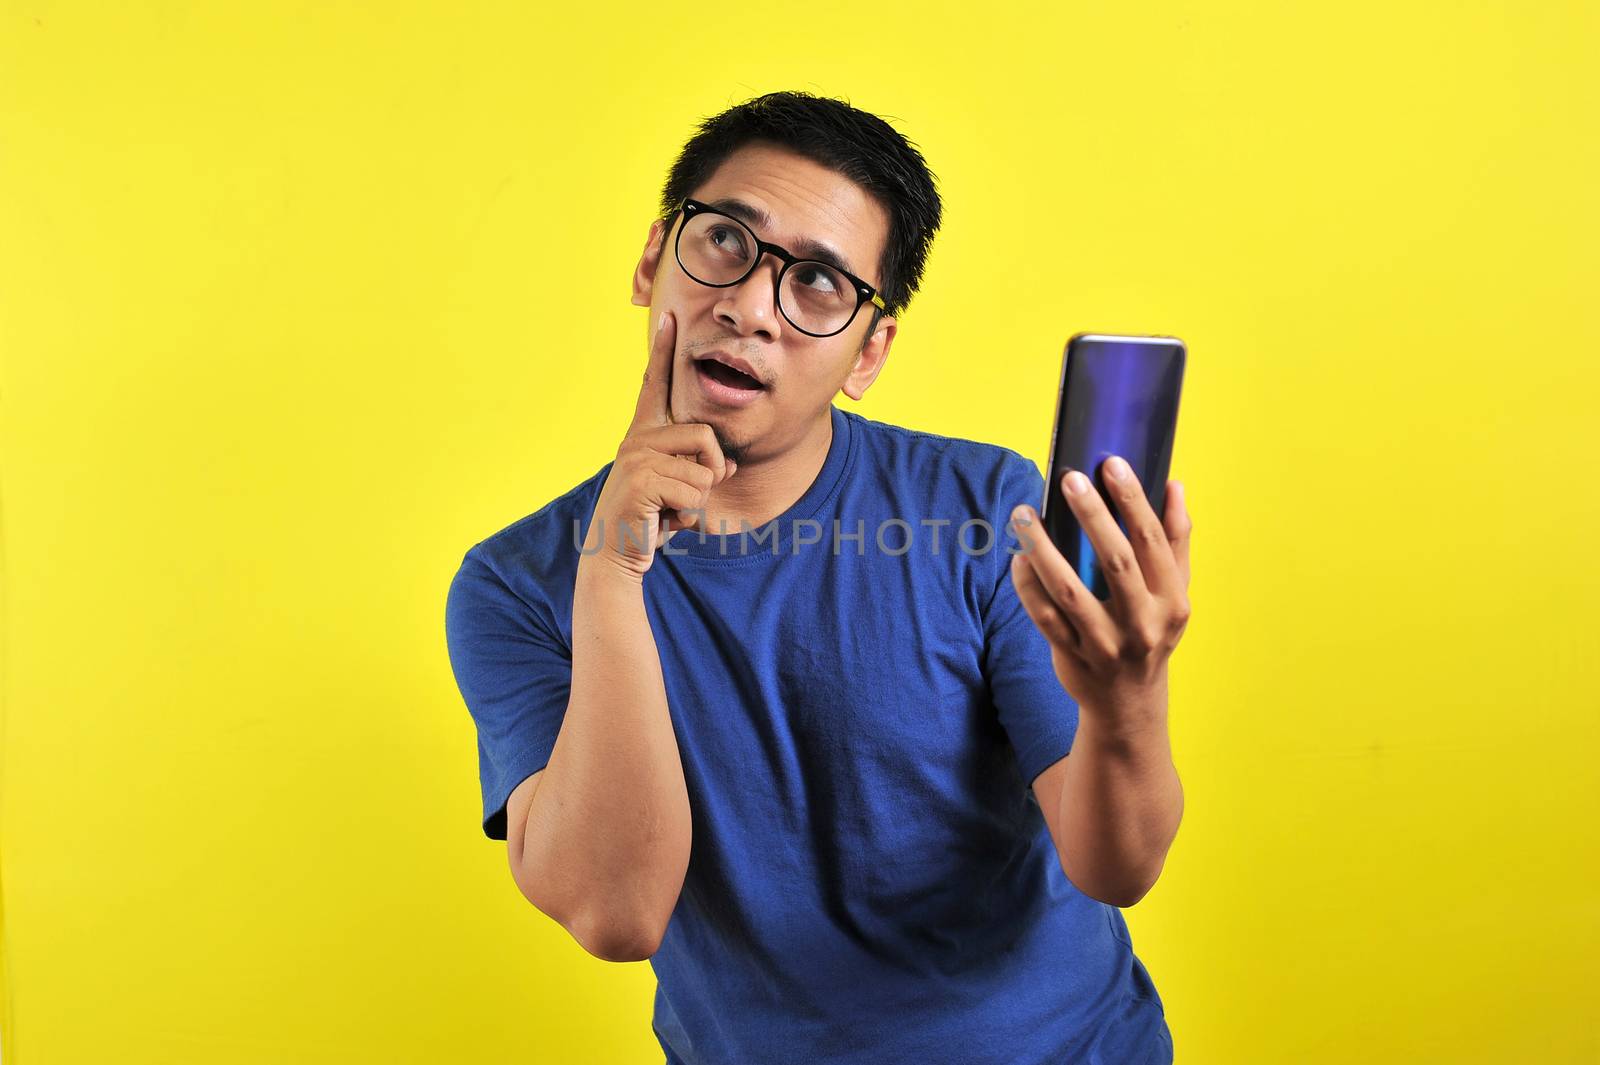 Asian man holding smartphone doing thinking gesture, isolated on yellow background